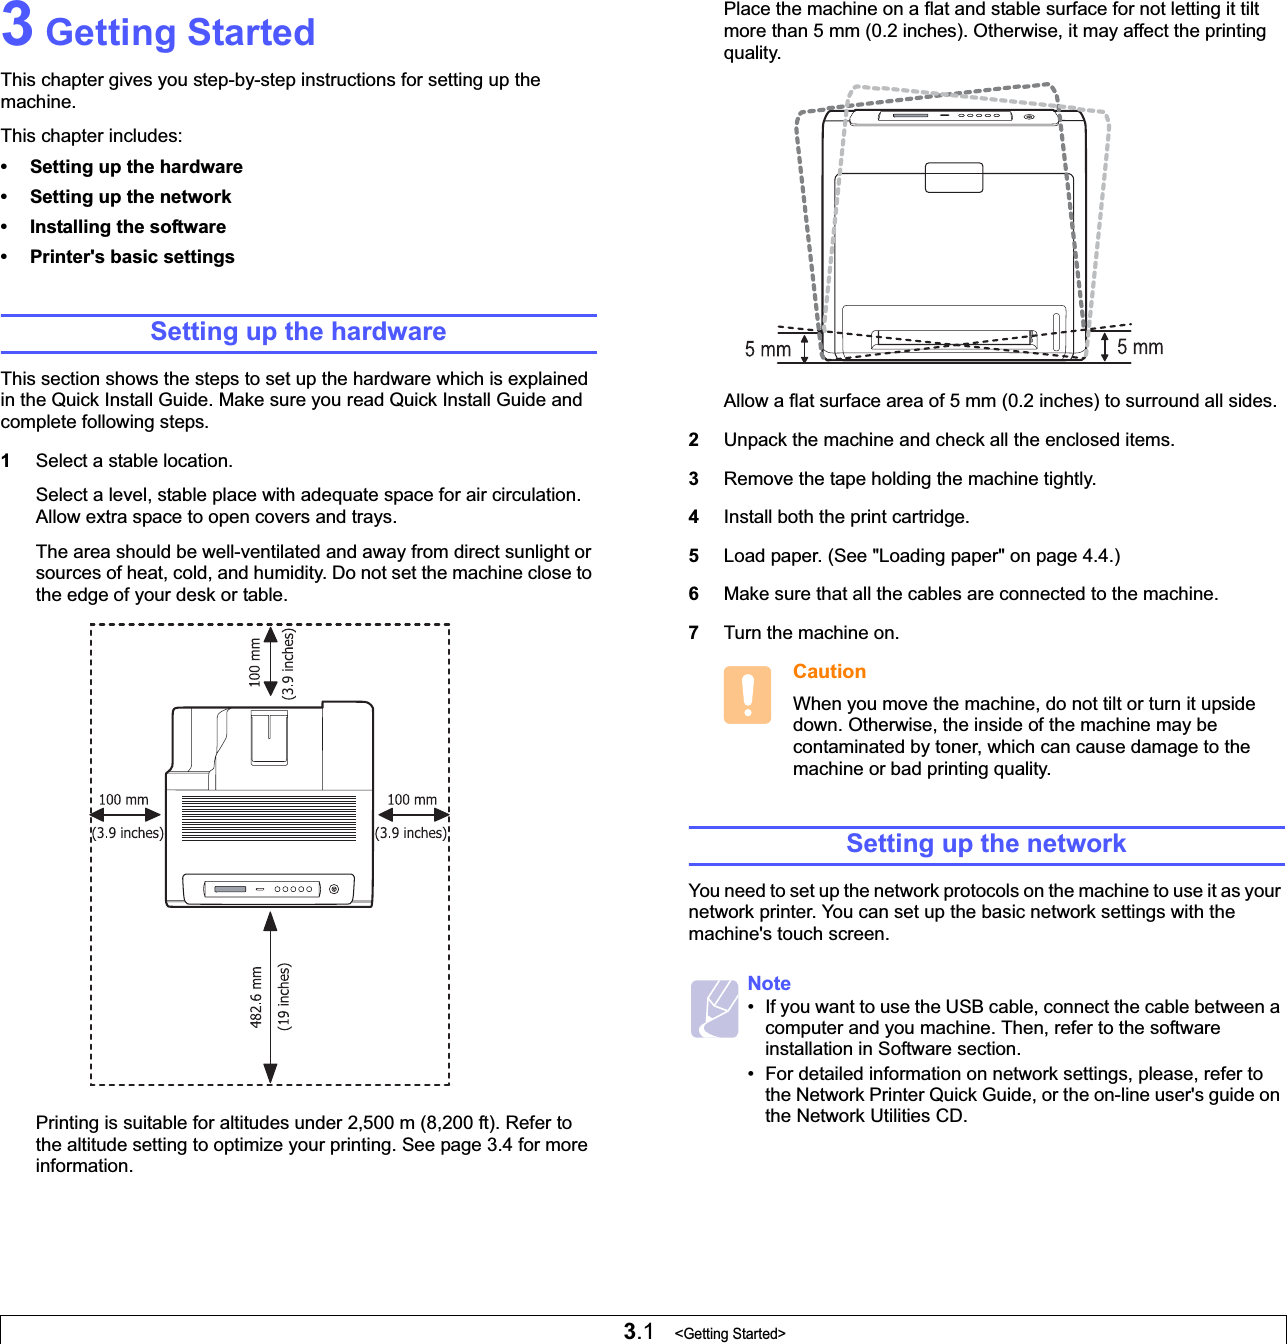 3.1   &lt;Getting Started&gt;3 Getting StartedThis chapter gives you step-by-step instructions for setting up the machine.This chapter includes:• Setting up the hardware• Setting up the network• Installing the software• Printer&apos;s basic settingsSetting up the hardwareThis section shows the steps to set up the hardware which is explained in the Quick Install Guide. Make sure you read Quick Install Guide and complete following steps.1Select a stable location. Select a level, stable place with adequate space for air circulation. Allow extra space to open covers and trays. The area should be well-ventilated and away from direct sunlight or sources of heat, cold, and humidity. Do not set the machine close to the edge of your desk or table. Printing is suitable for altitudes under 2,500 m (8,200 ft). Refer to the altitude setting to optimize your printing. See page 3.4 for more information.Place the machine on a flat and stable surface for not letting it tilt more than 5 mm (0.2 inches). Otherwise, it may affect the printing quality. Allow a flat surface area of 5 mm (0.2 inches) to surround all sides. 2Unpack the machine and check all the enclosed items.3Remove the tape holding the machine tightly.4Install both the print cartridge.5Load paper. (See &quot;Loading paper&quot; on page 4.4.)6Make sure that all the cables are connected to the machine. 7Turn the machine on. CautionWhen you move the machine, do not tilt or turn it upside down. Otherwise, the inside of the machine may be contaminated by toner, which can cause damage to the machine or bad printing quality.Setting up the networkYou need to set up the network protocols on the machine to use it as your network printer. You can set up the basic network settings with the machine&apos;s touch screen.Note• If you want to use the USB cable, connect the cable between a computer and you machine. Then, refer to the software installation in Software section.• For detailed information on network settings, please, refer to the Network Printer Quick Guide, or the on-line user&apos;s guide on the Network Utilities CD. 